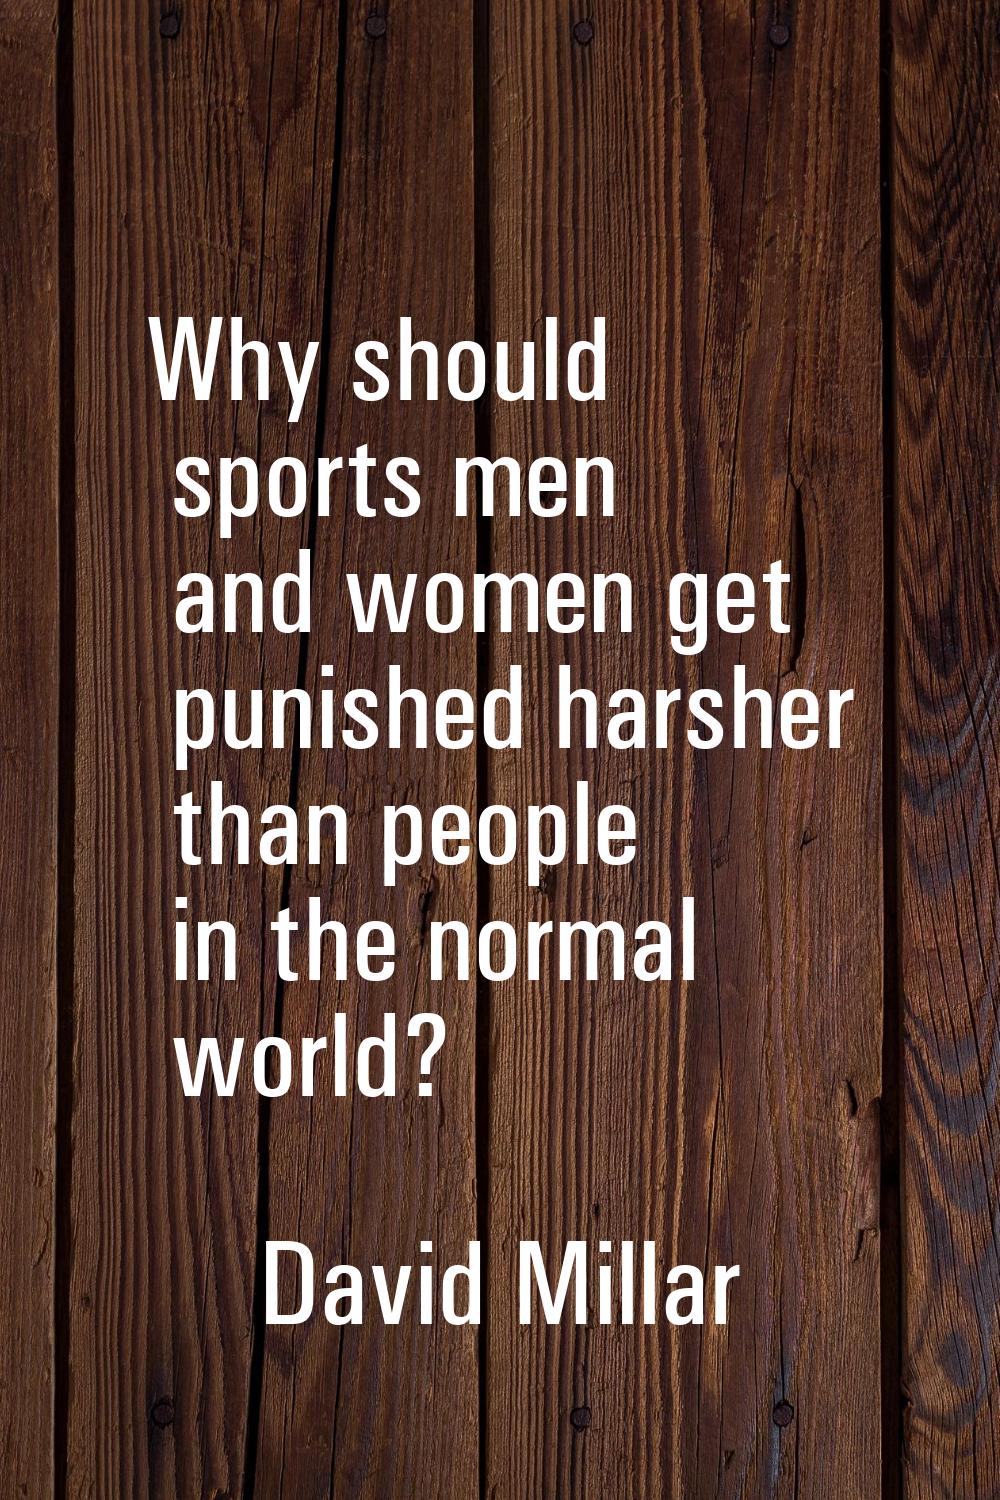 Why should sports men and women get punished harsher than people in the normal world?